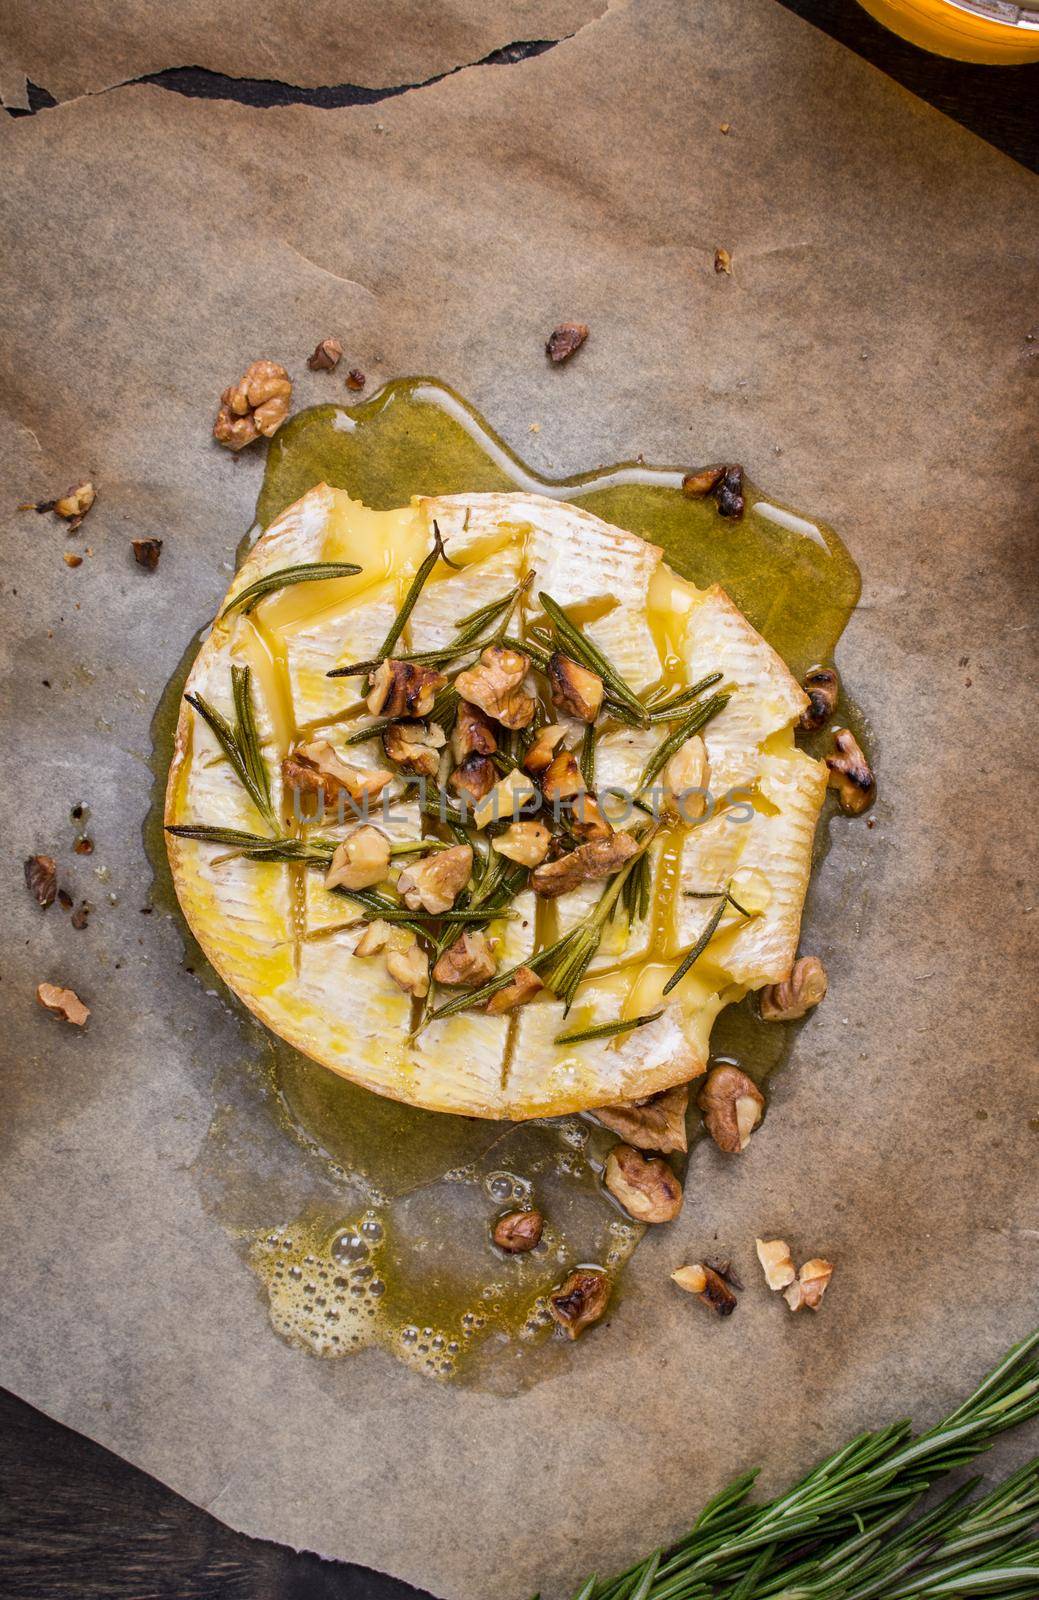 Delicious beautiful baked camembert with honey, walnuts, herbs and pears